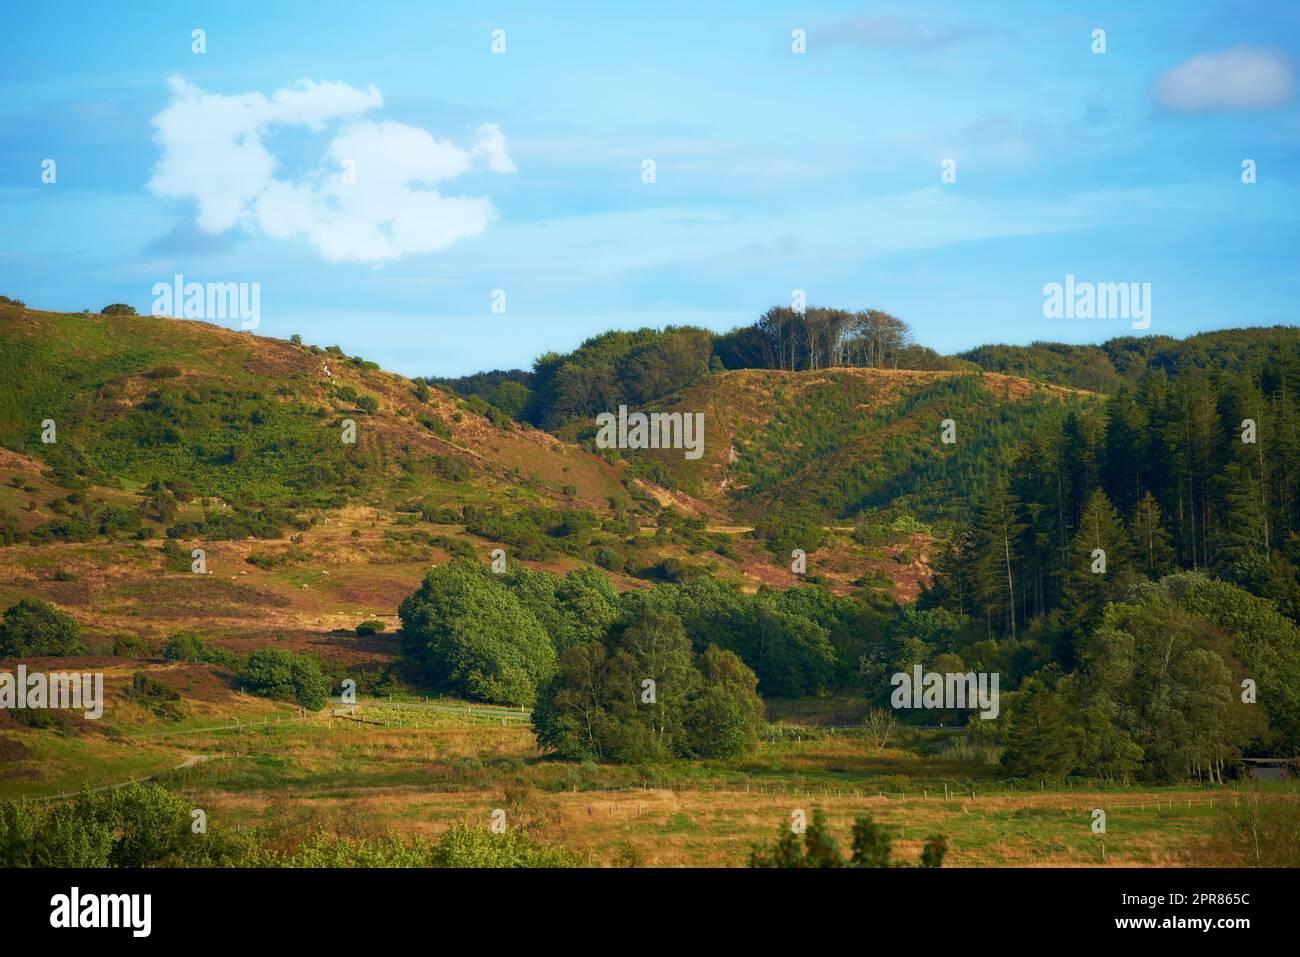 Hills with green grass, trees and plants on a cloudy summer day. Beautiful landscape and scenery of nature. Outdoors in an adventurous location to hike and explore. Mountain range with a scenic view Stock Photo